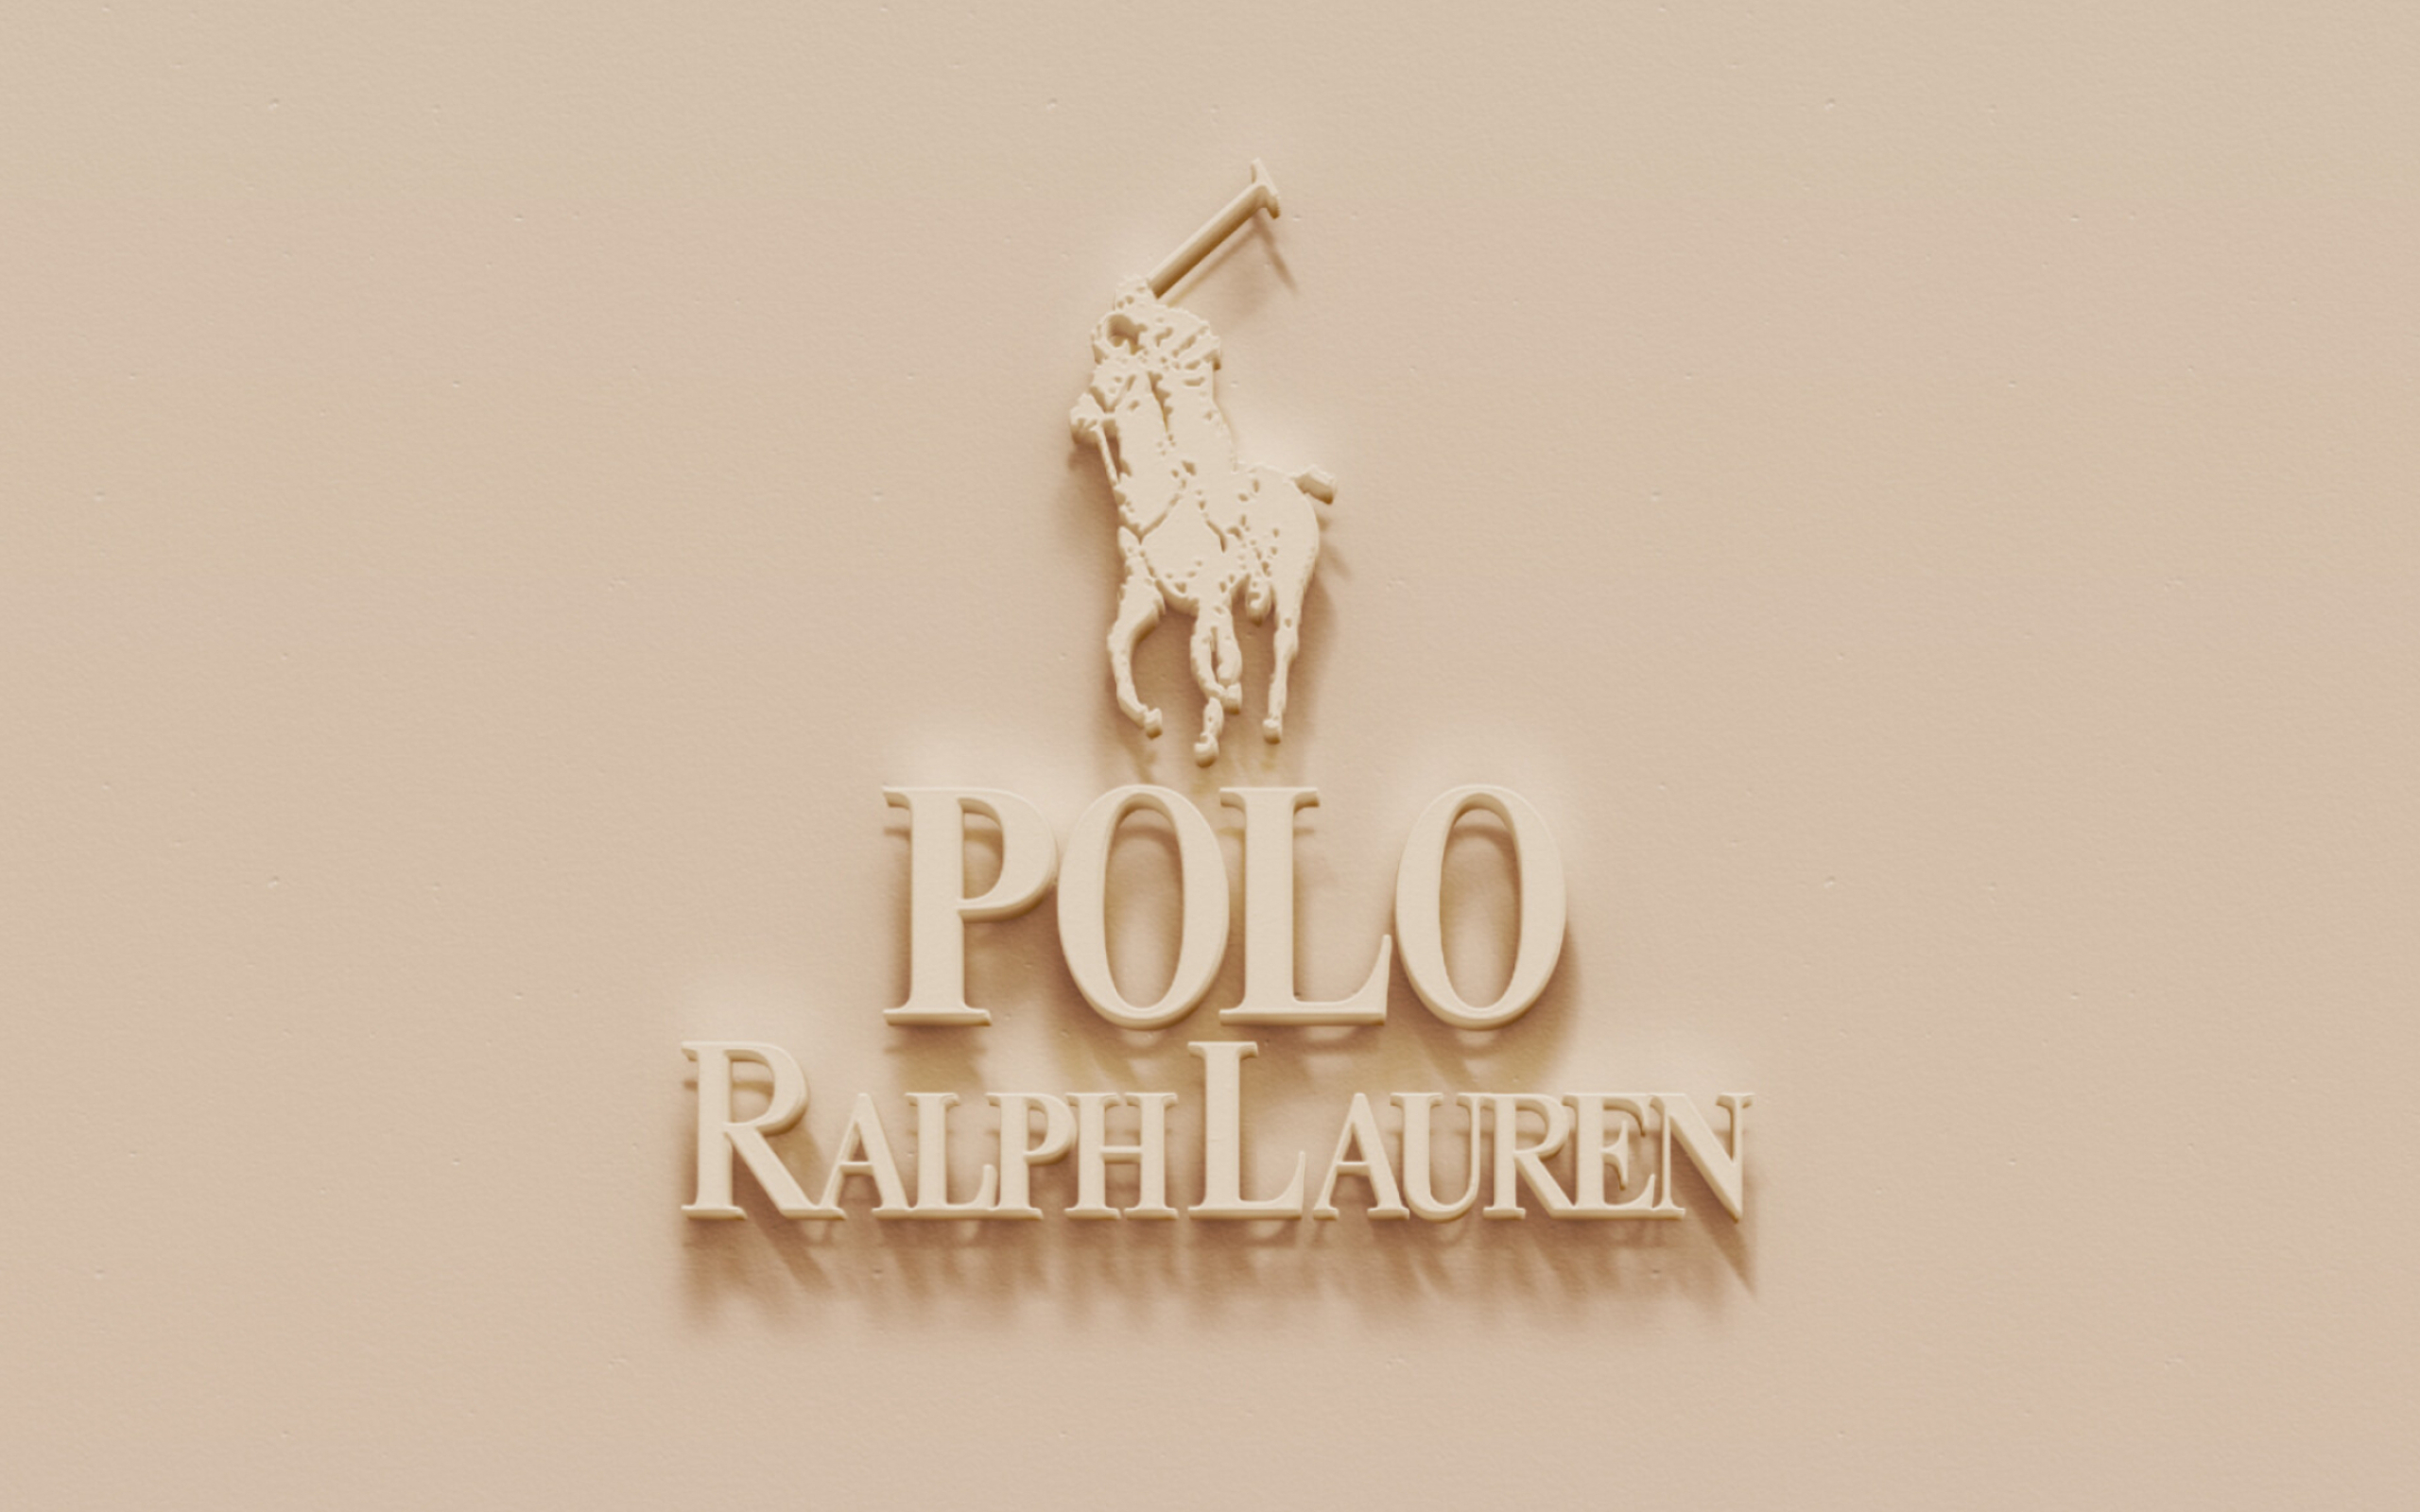 Ralph Lauren: One of the most legendary fashion designers of all time. 2560x1600 HD Wallpaper.